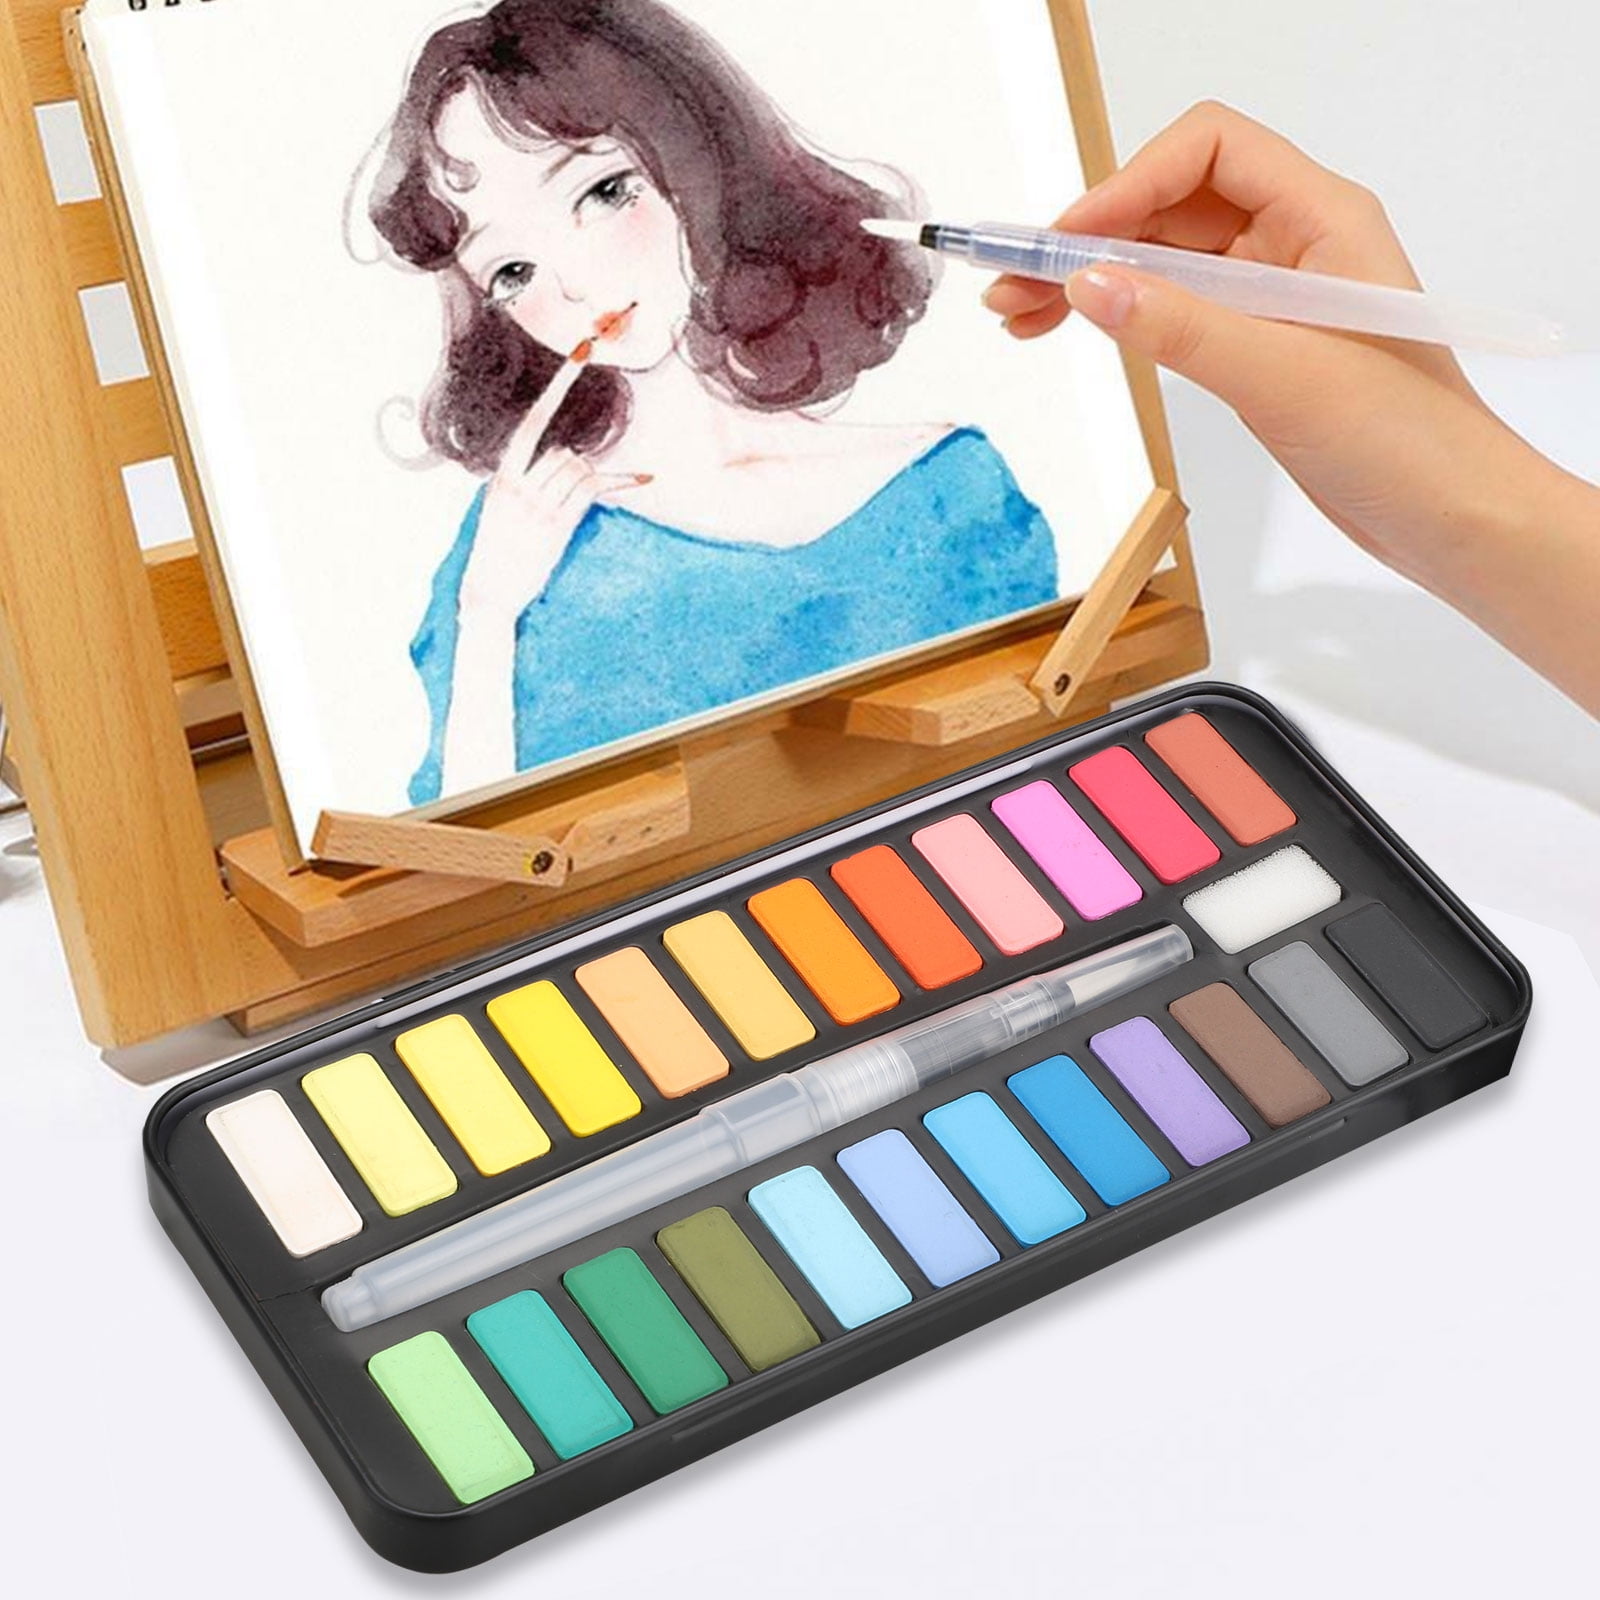 24 50 Assorted Watercolor Paints Set Perfect Pan With Water Brusheixing Palette For Beginners And Artists Journal Sketching Painting Coloring Drawing Art Supplies Com - Watercolor Paint Set With Brush